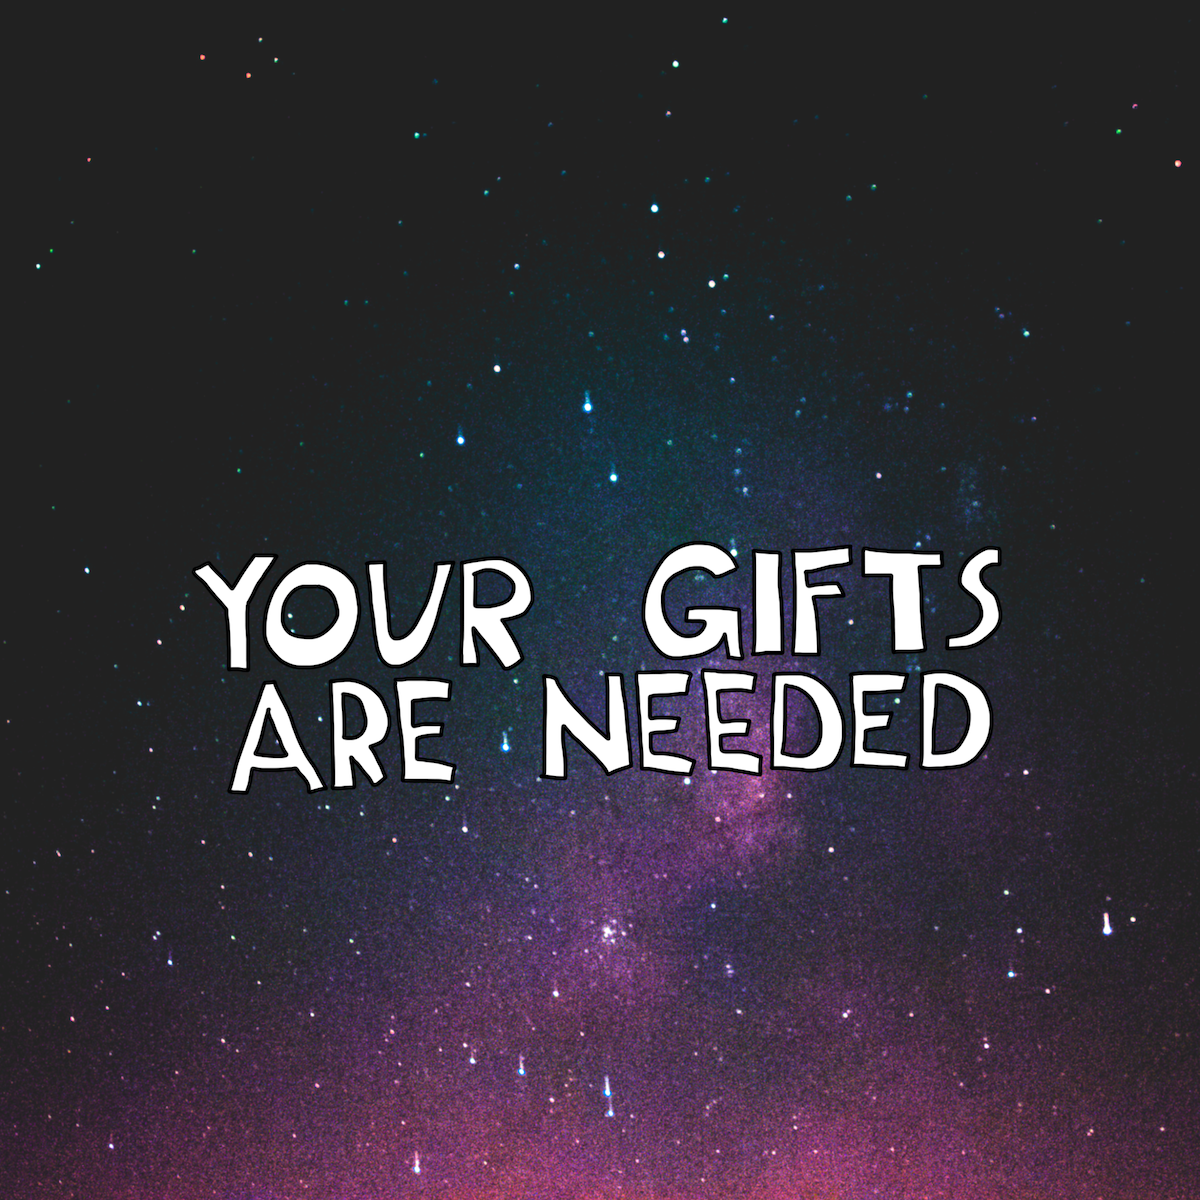 Your gifts are needed. Update on Marketing as a Creative + Spiritual Practice.